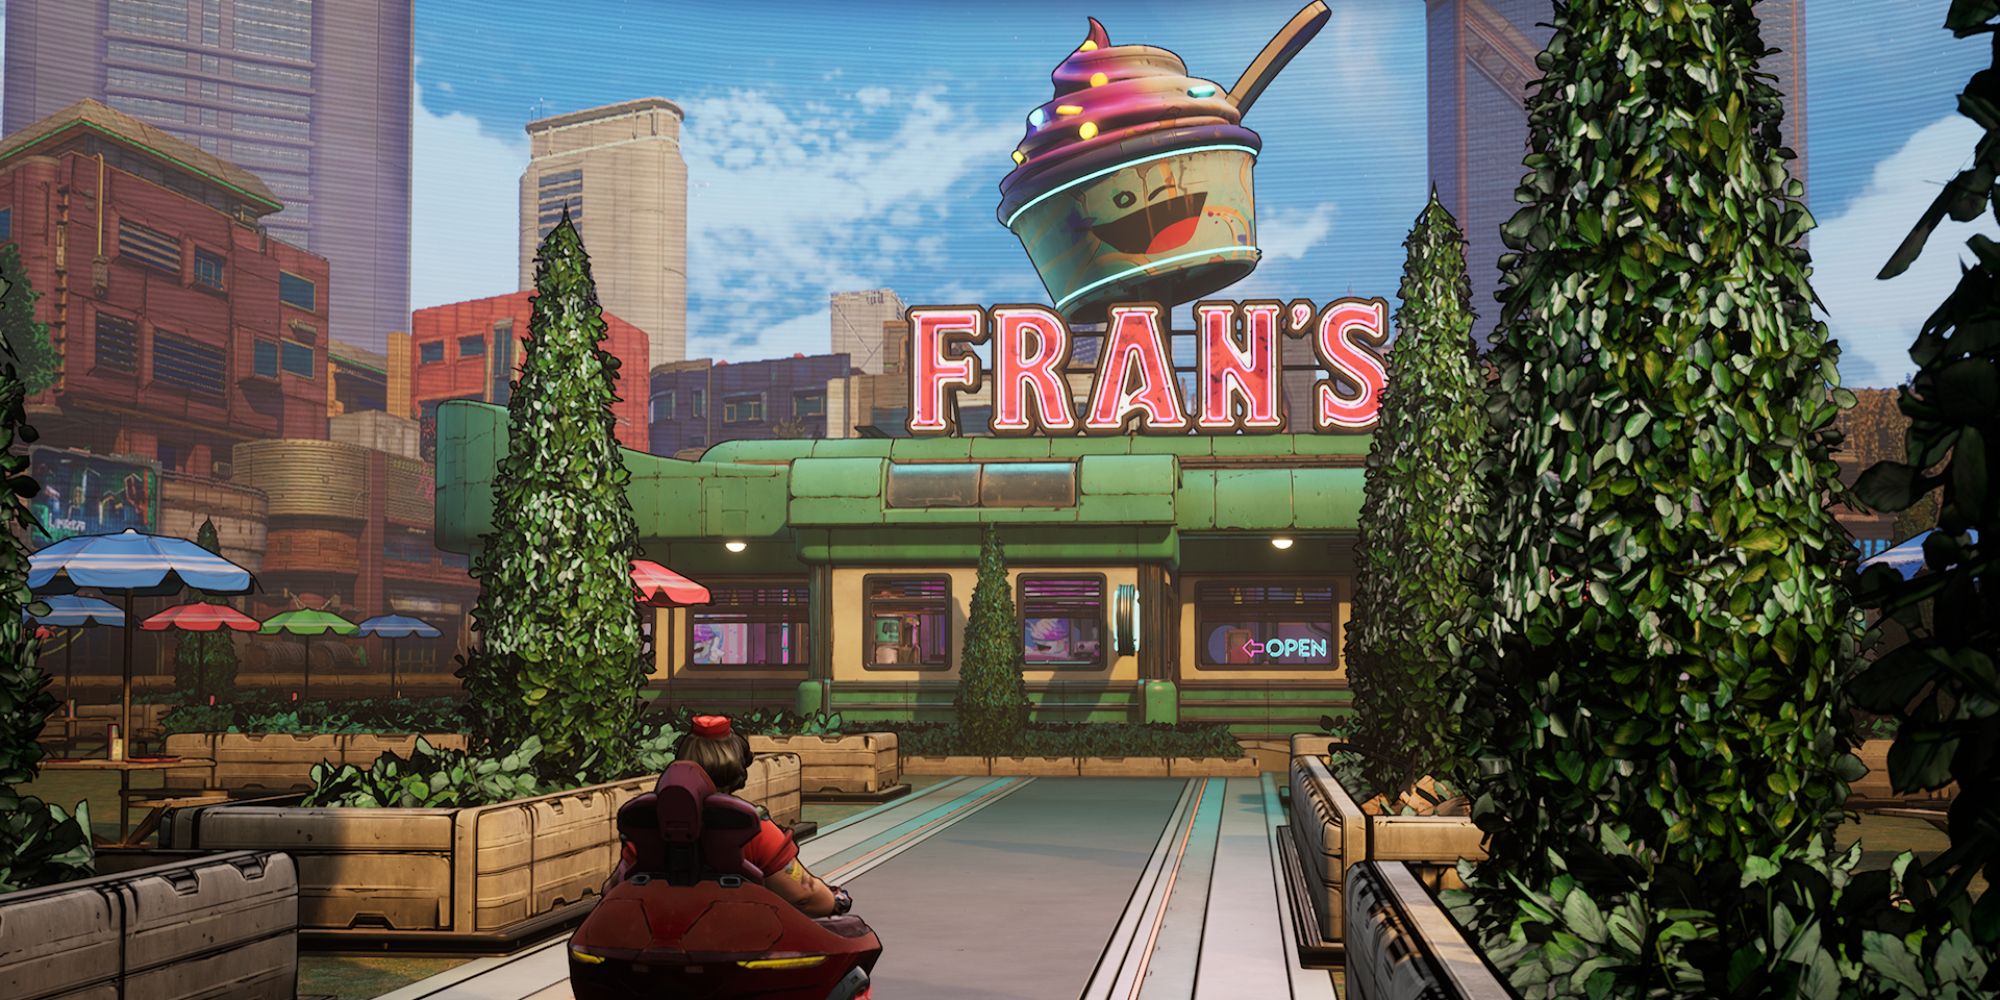 New Tales From The Borderlands Screenshot Of Fran's Fantasy Shop